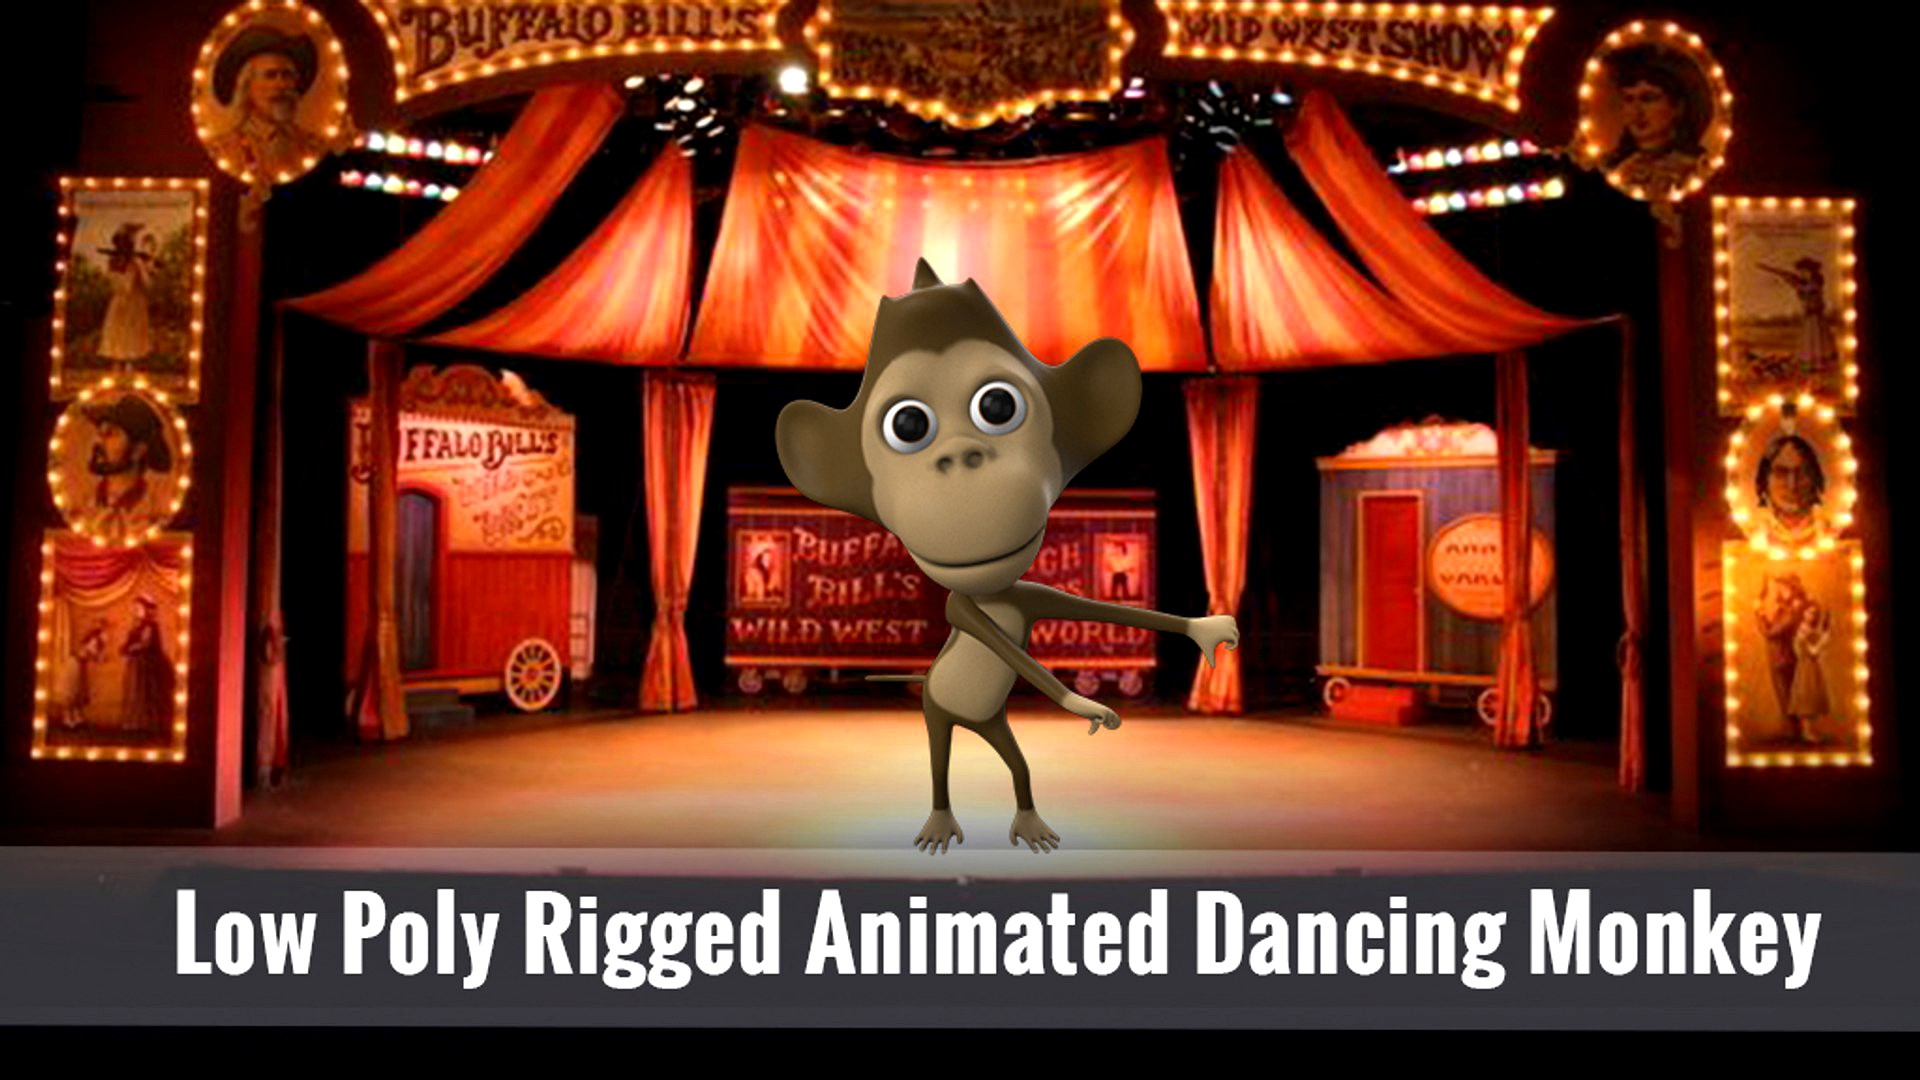 Low Poly Rigged Animated Dancing Monkey